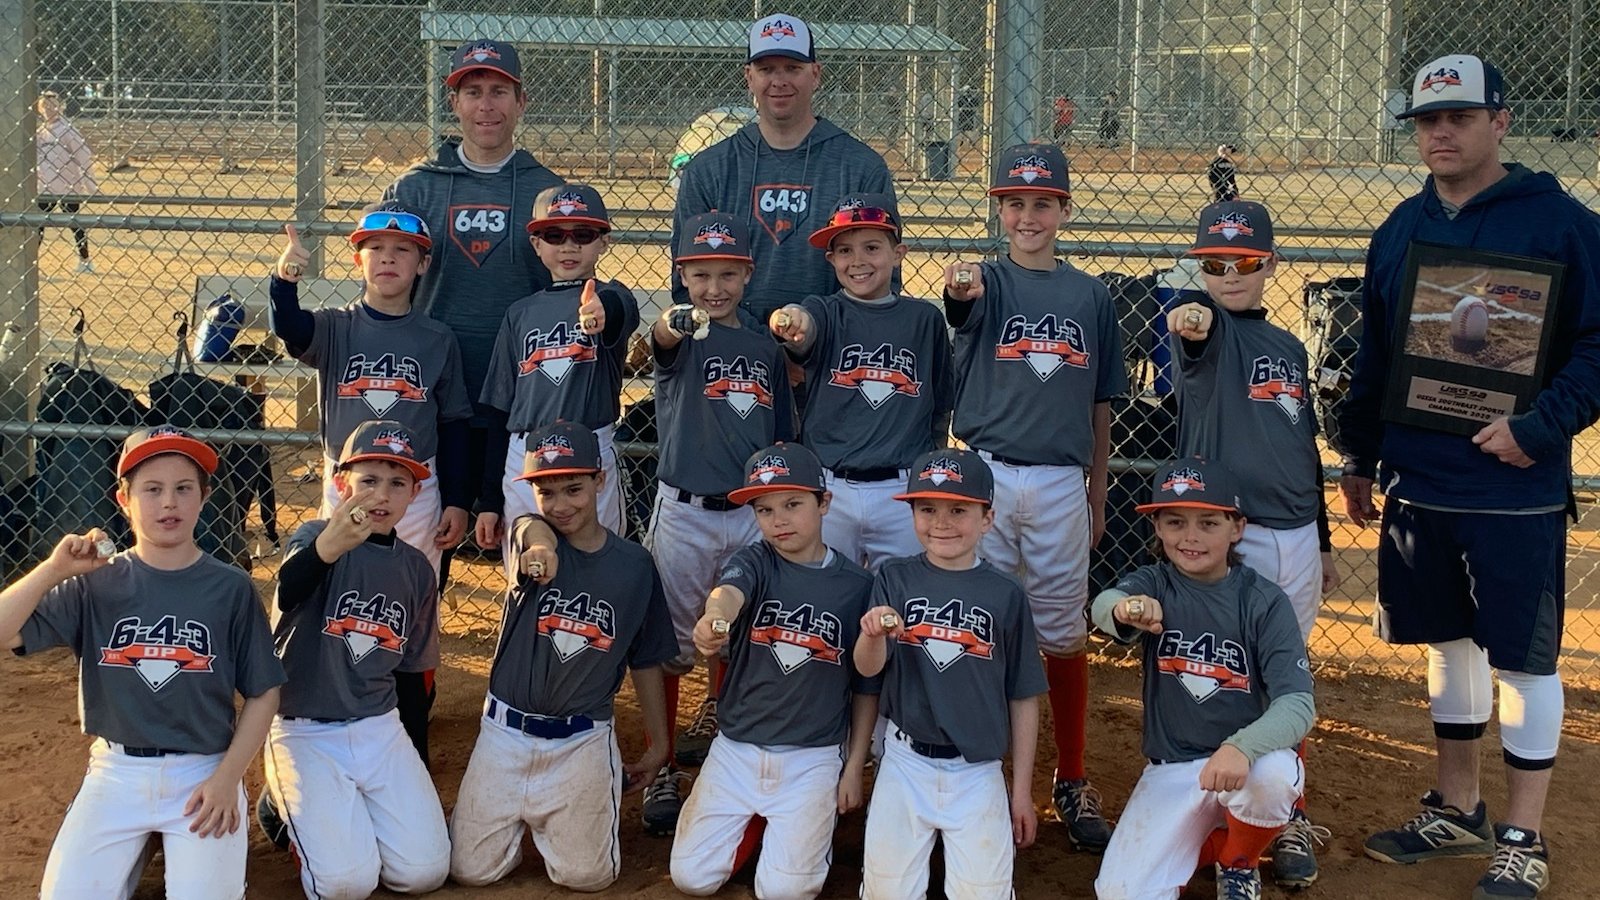 6-4-3 DP Baseball on Twitter: the 6-4-3 DP Jaguars 9U team for winning the AA division of the USSSA tournament event (Global Qualifier 300 Points) this past weekend! #643pride #rawlingsplatinumclub